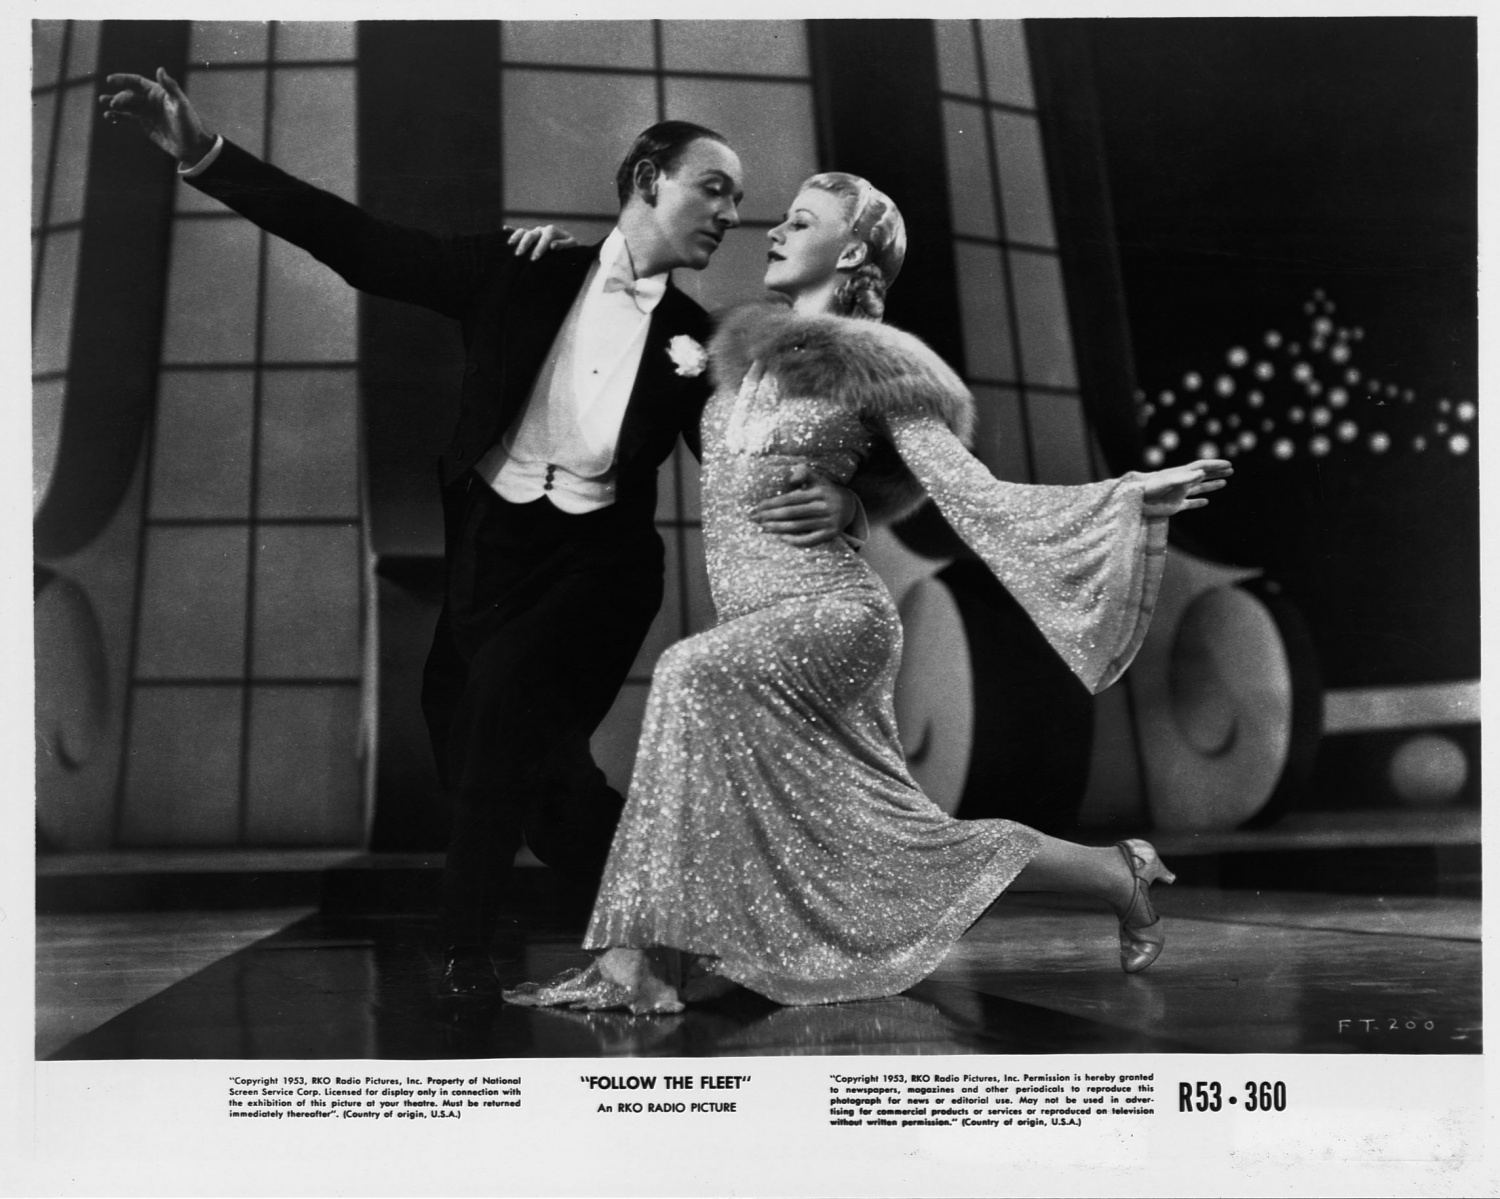 Fred Astaire and Ginger Rogers Dancing